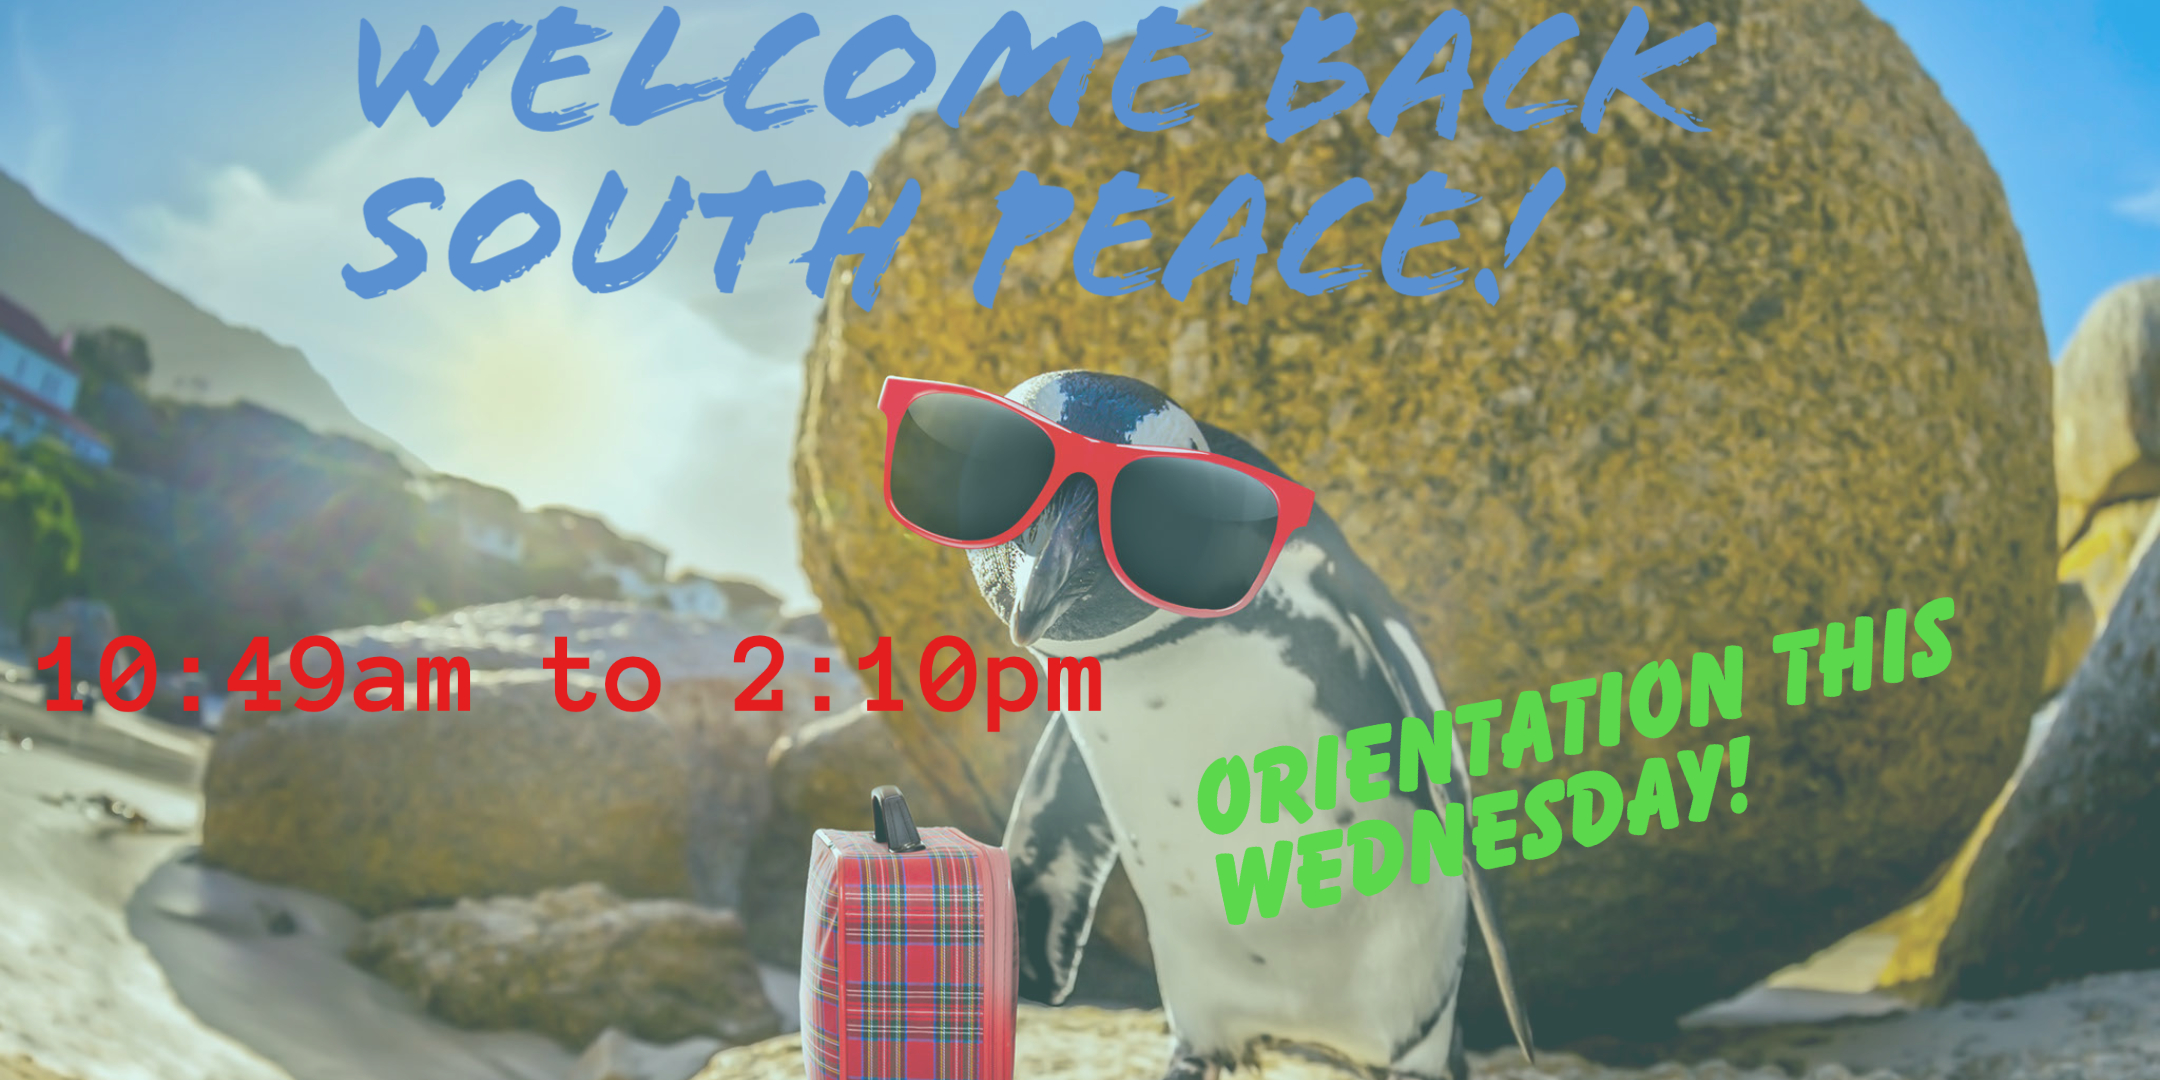 DCSS South Peace Orientation This Wednesday -- See you there!